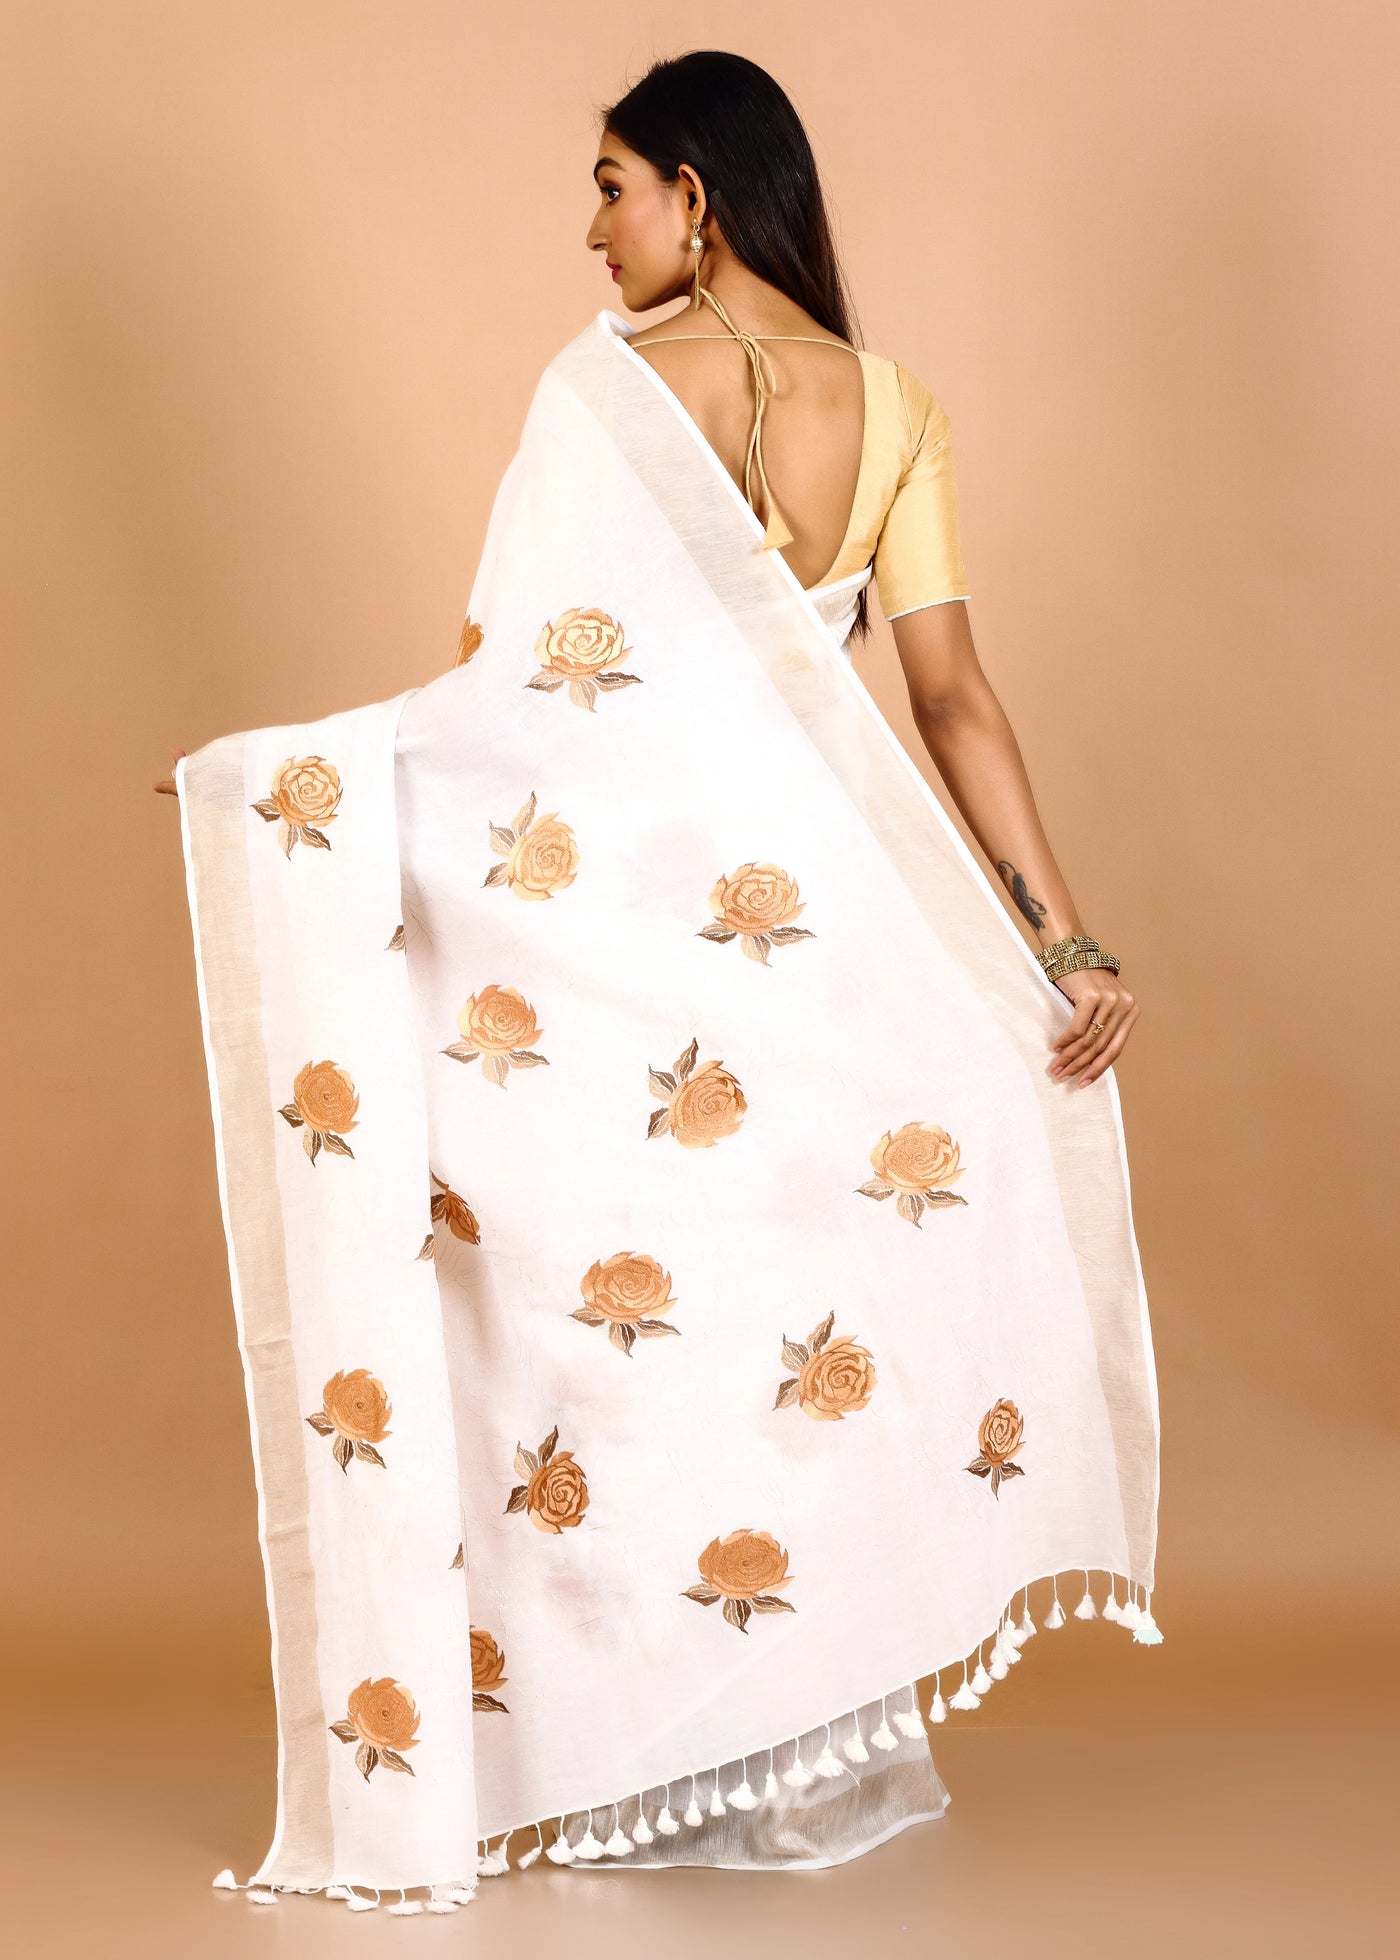 White Silk Linen Floral Embroidery Saree With Full Body Design